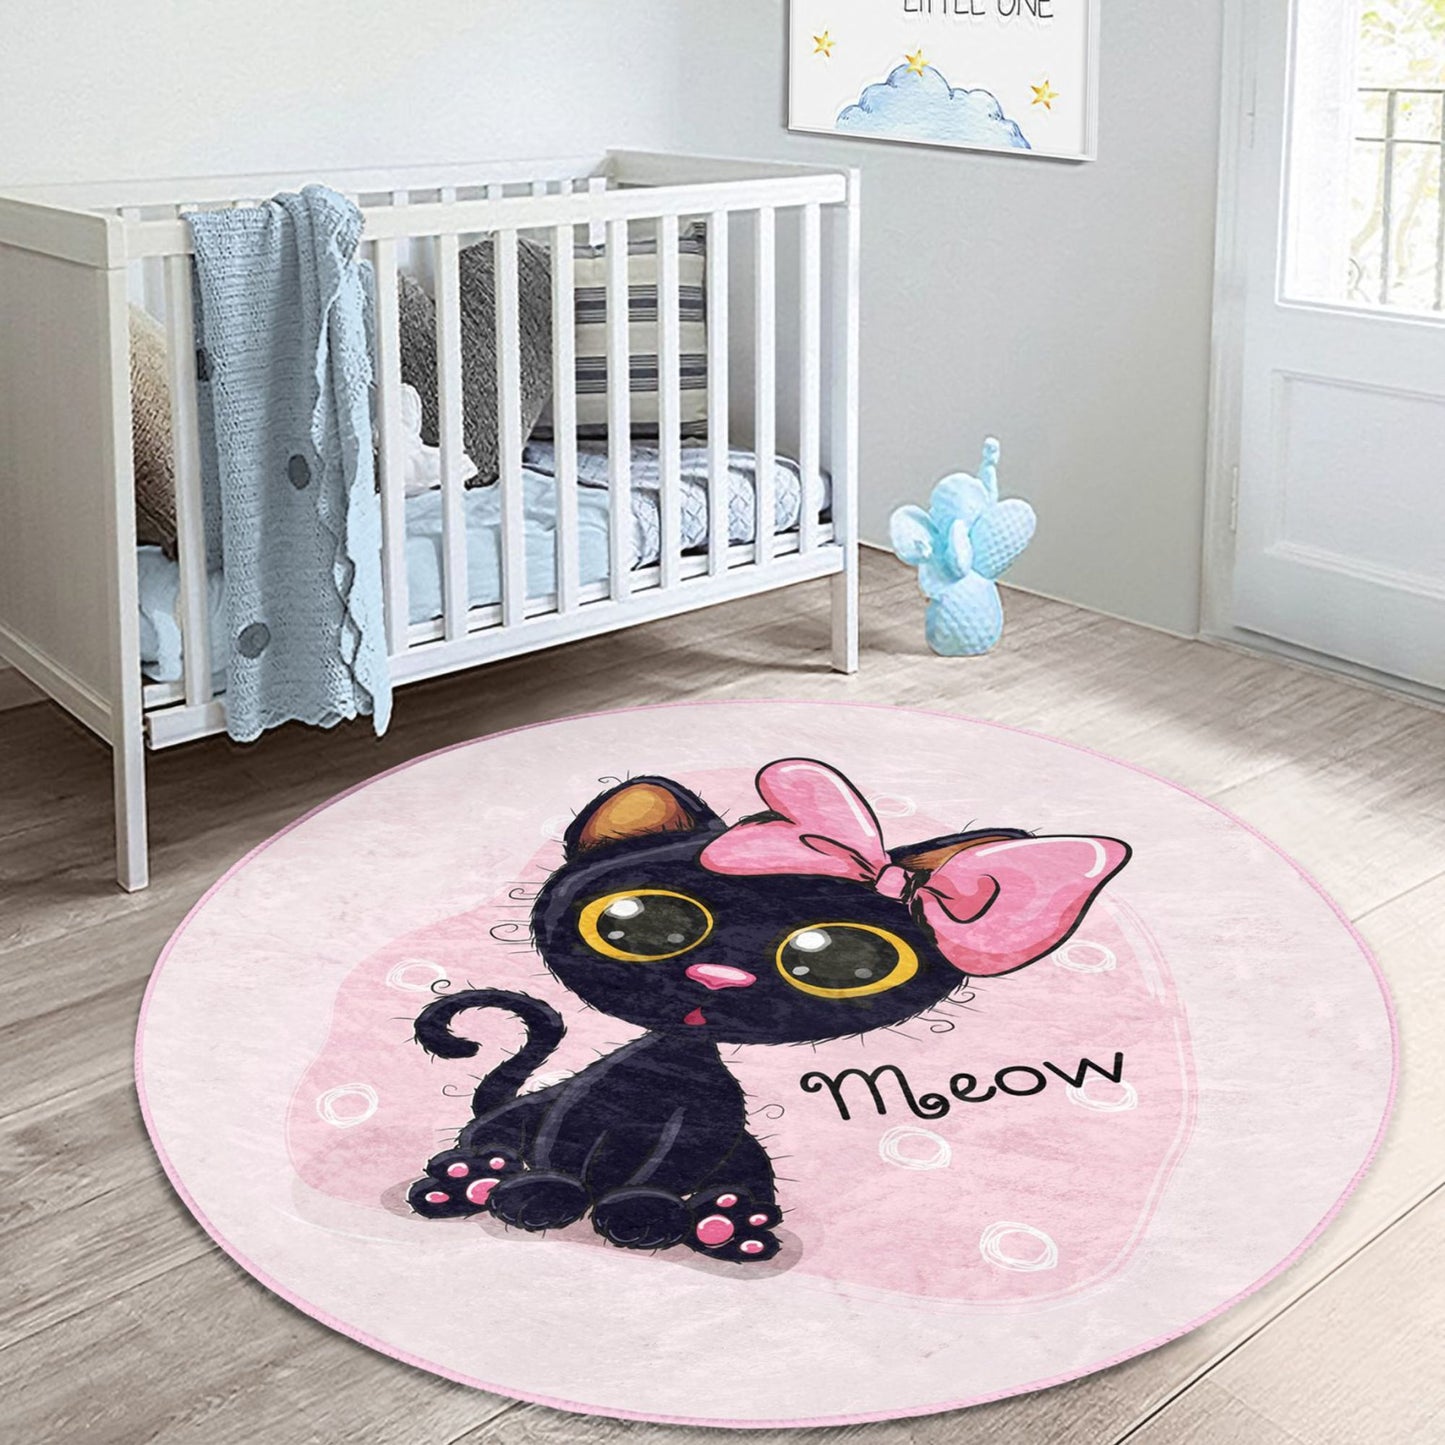 Homeezone Round Rug - Create a Playful Ambiance for Kids